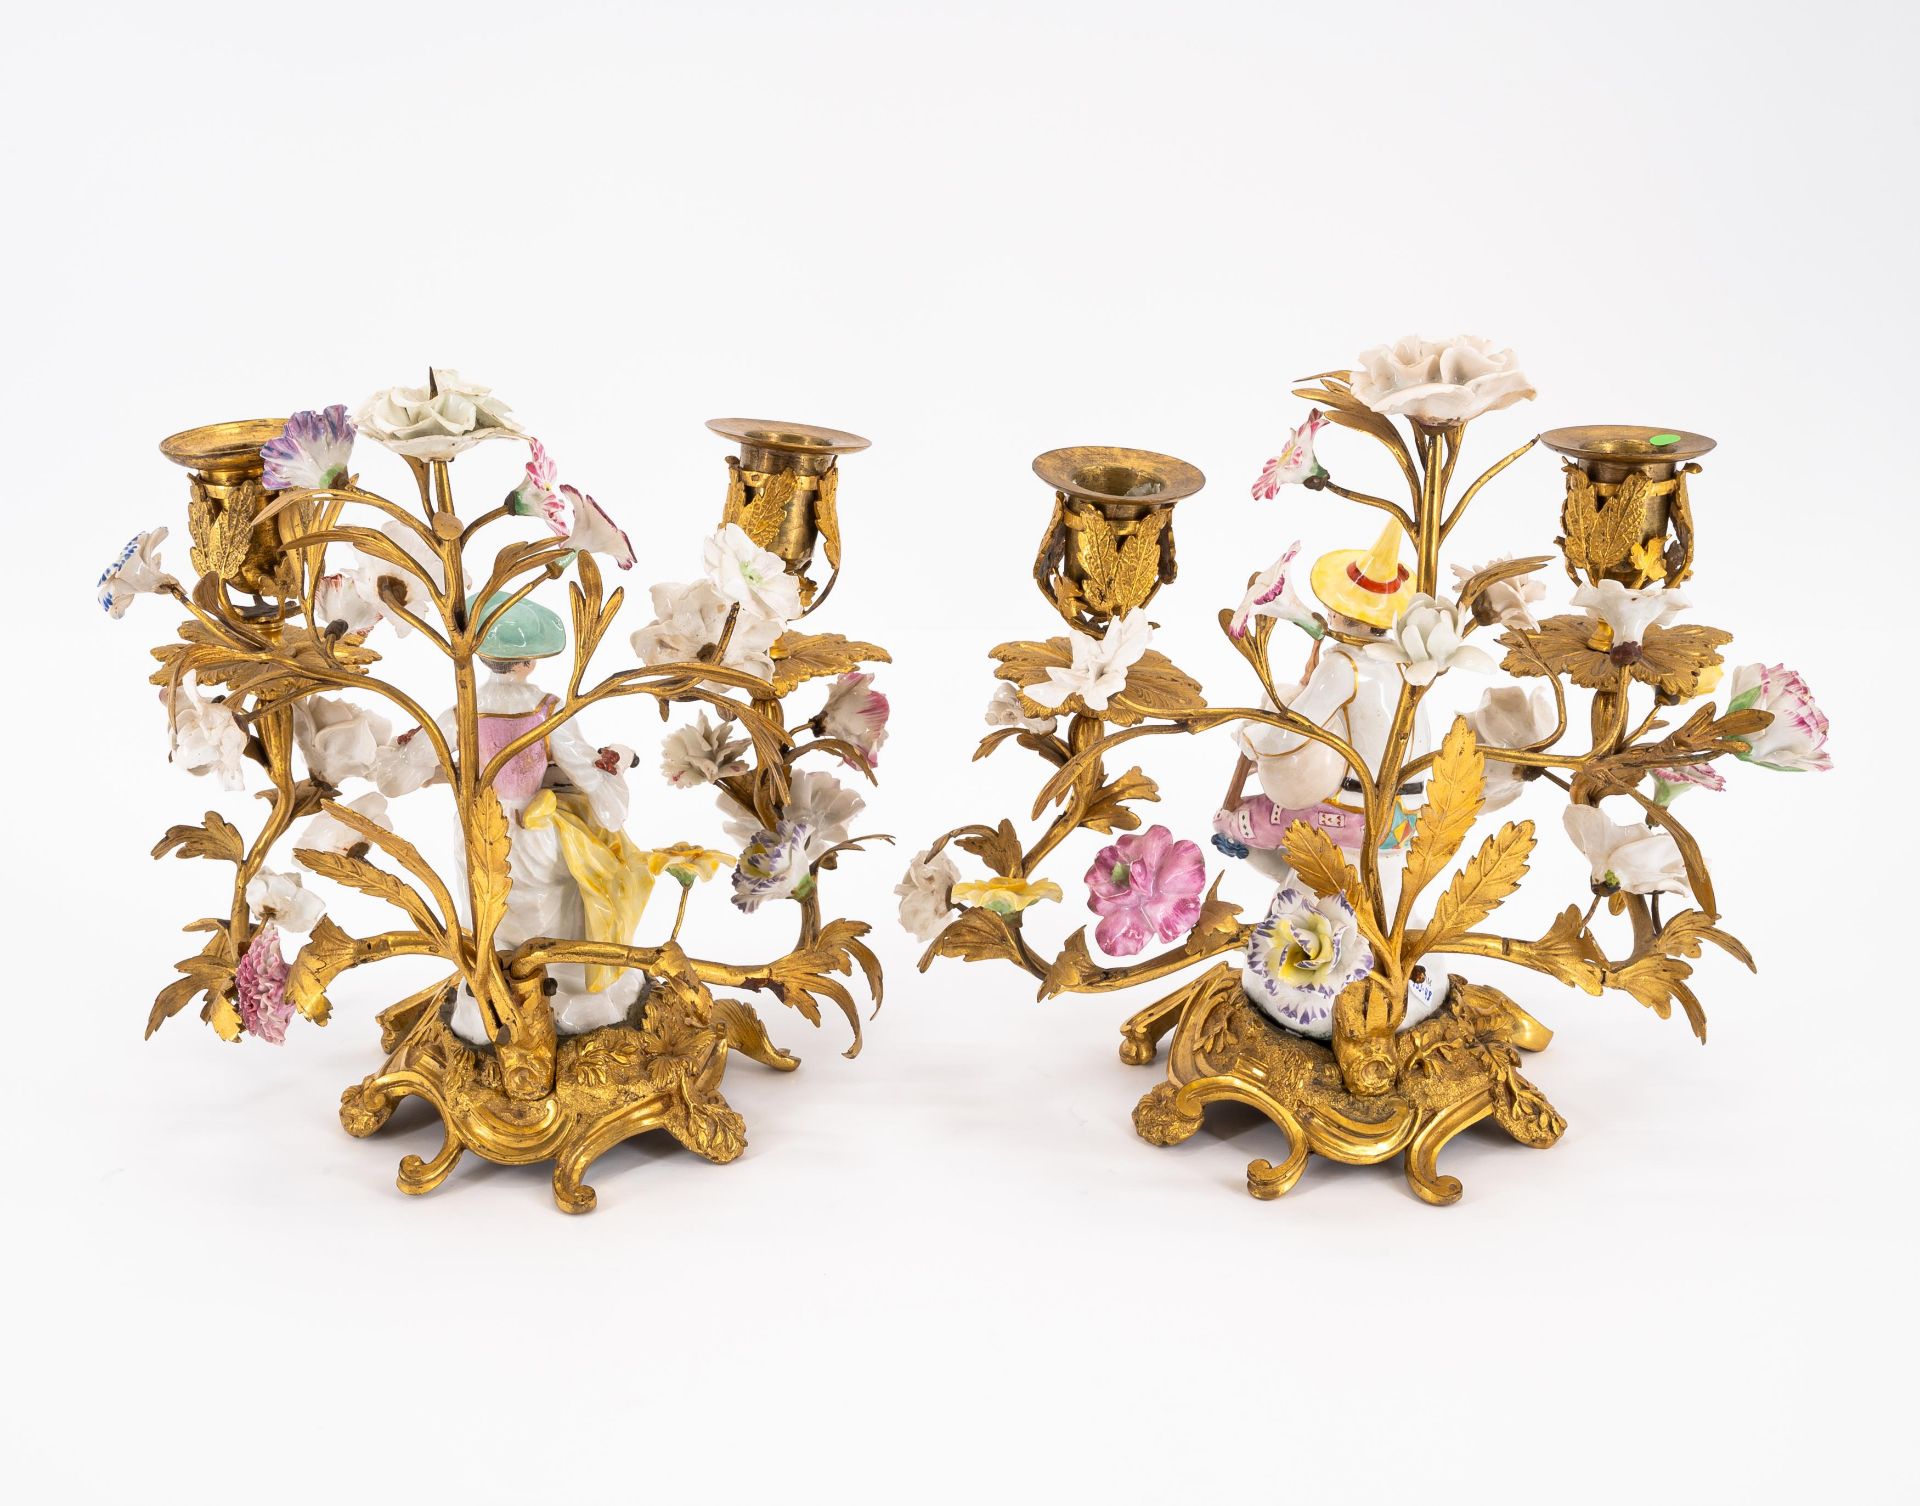 France: PAIR OF GILT BRONZE CANDELABRAS WITH TENDRIL BRANCHES AND PORCELAIN MUSICIANS - Image 3 of 5